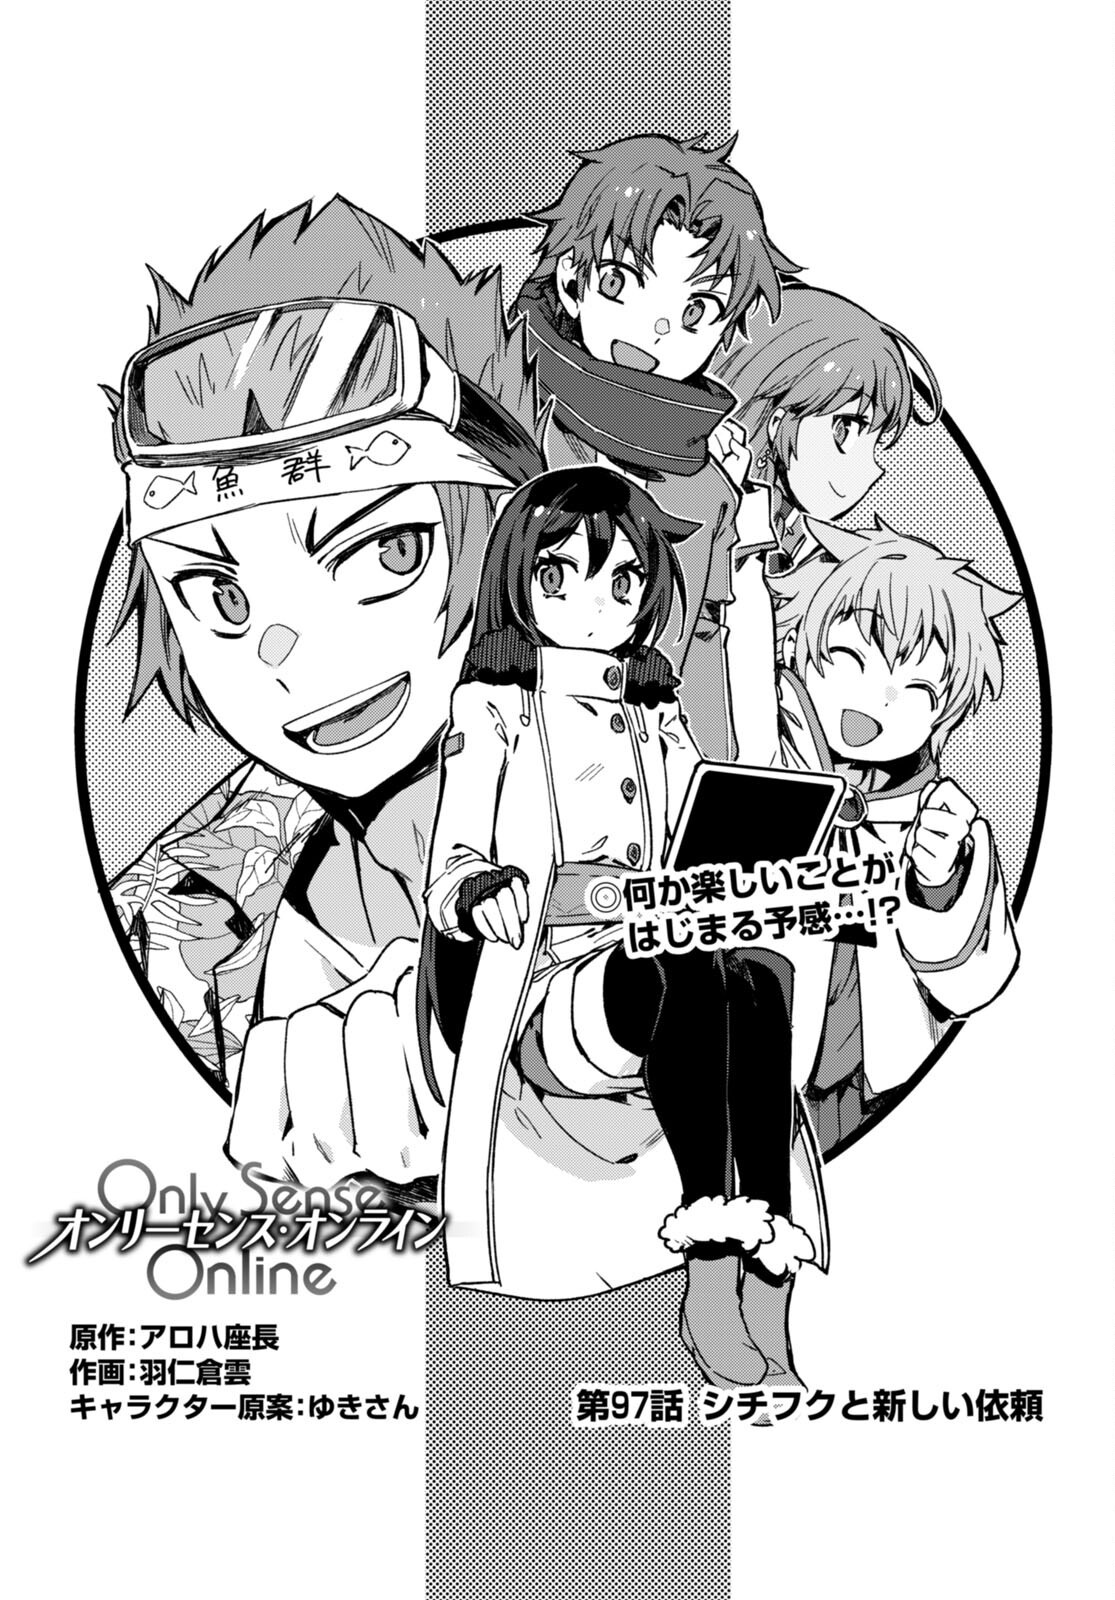 Only Sense Online Chapter 97 - Picture 1